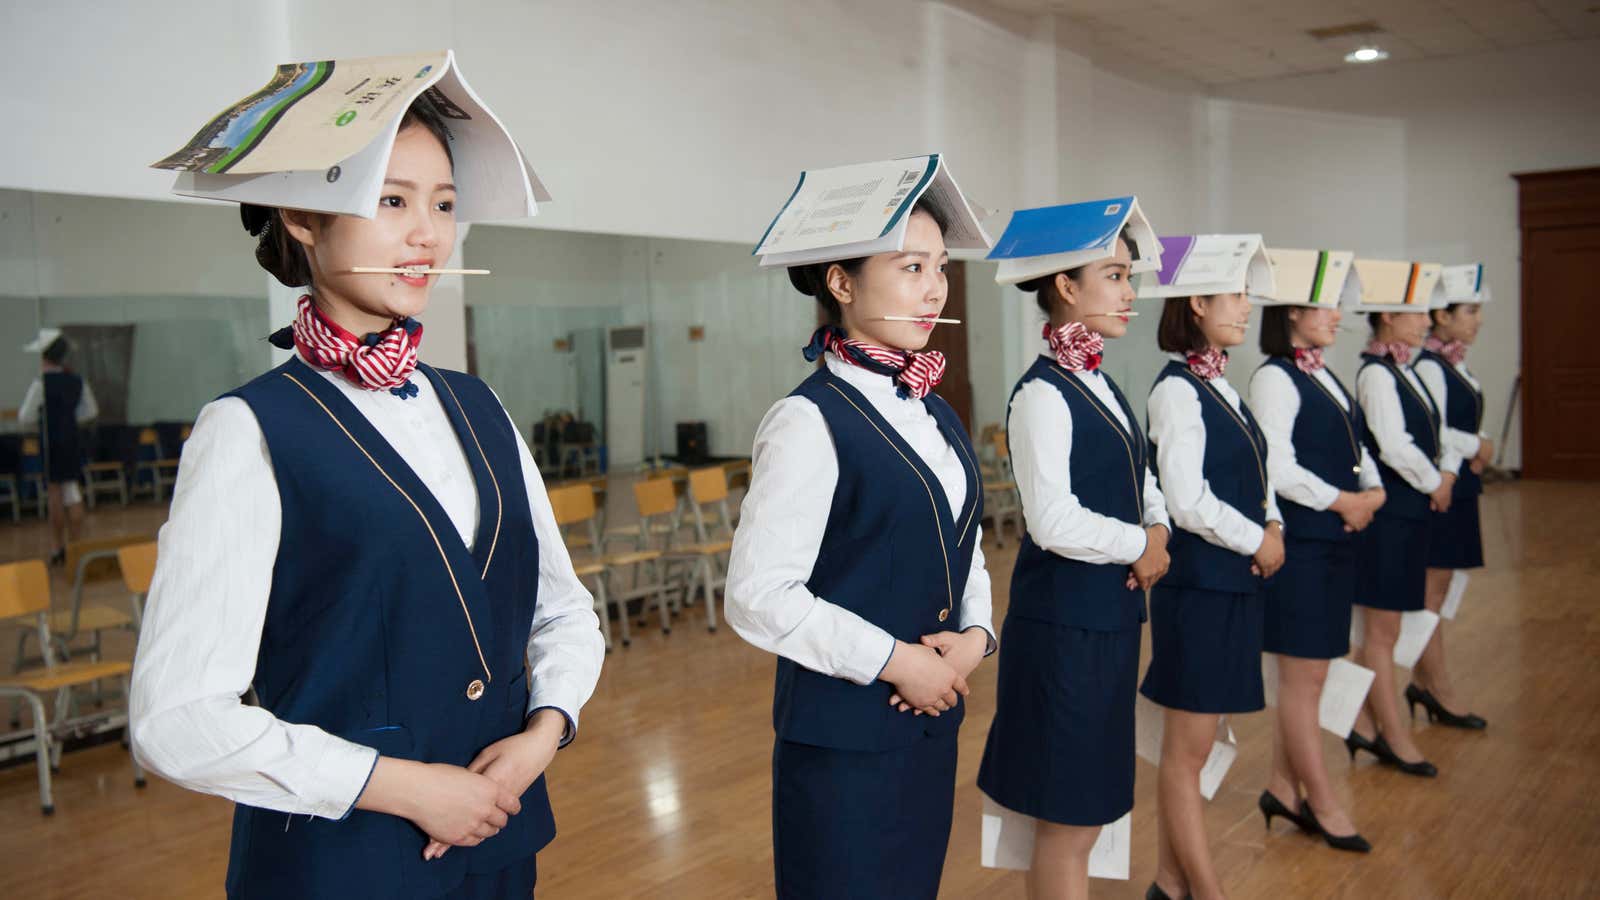 Students training to be flight attendants hold books on their heads, chopsticks in their mouths, and papers in a standing posture practice in China.